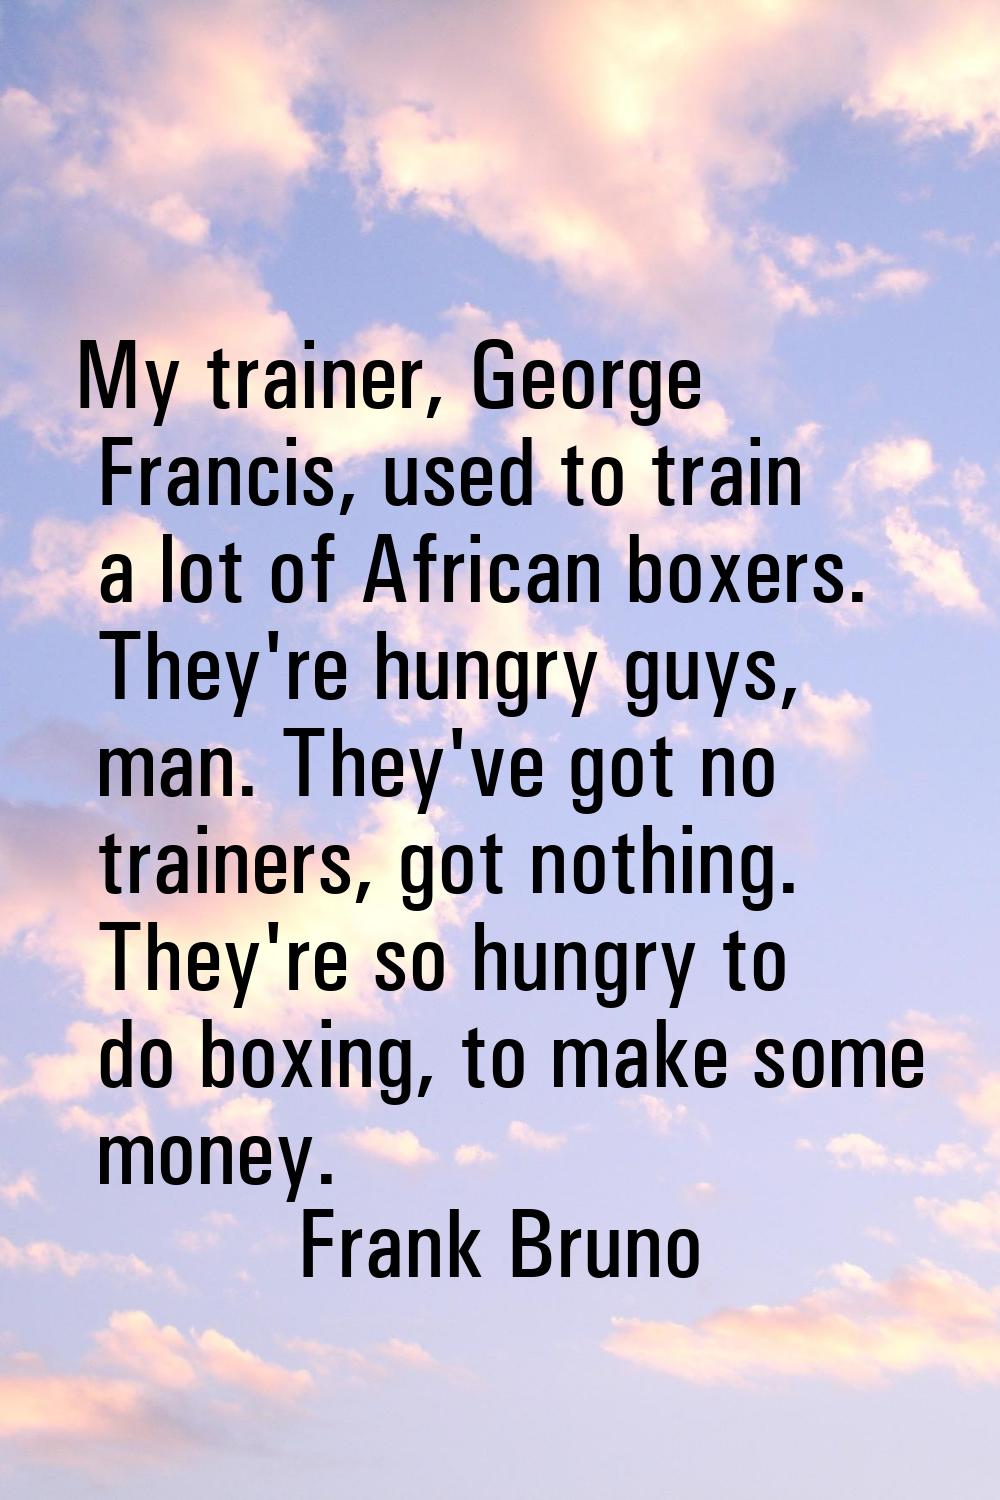 My trainer, George Francis, used to train a lot of African boxers. They're hungry guys, man. They'v